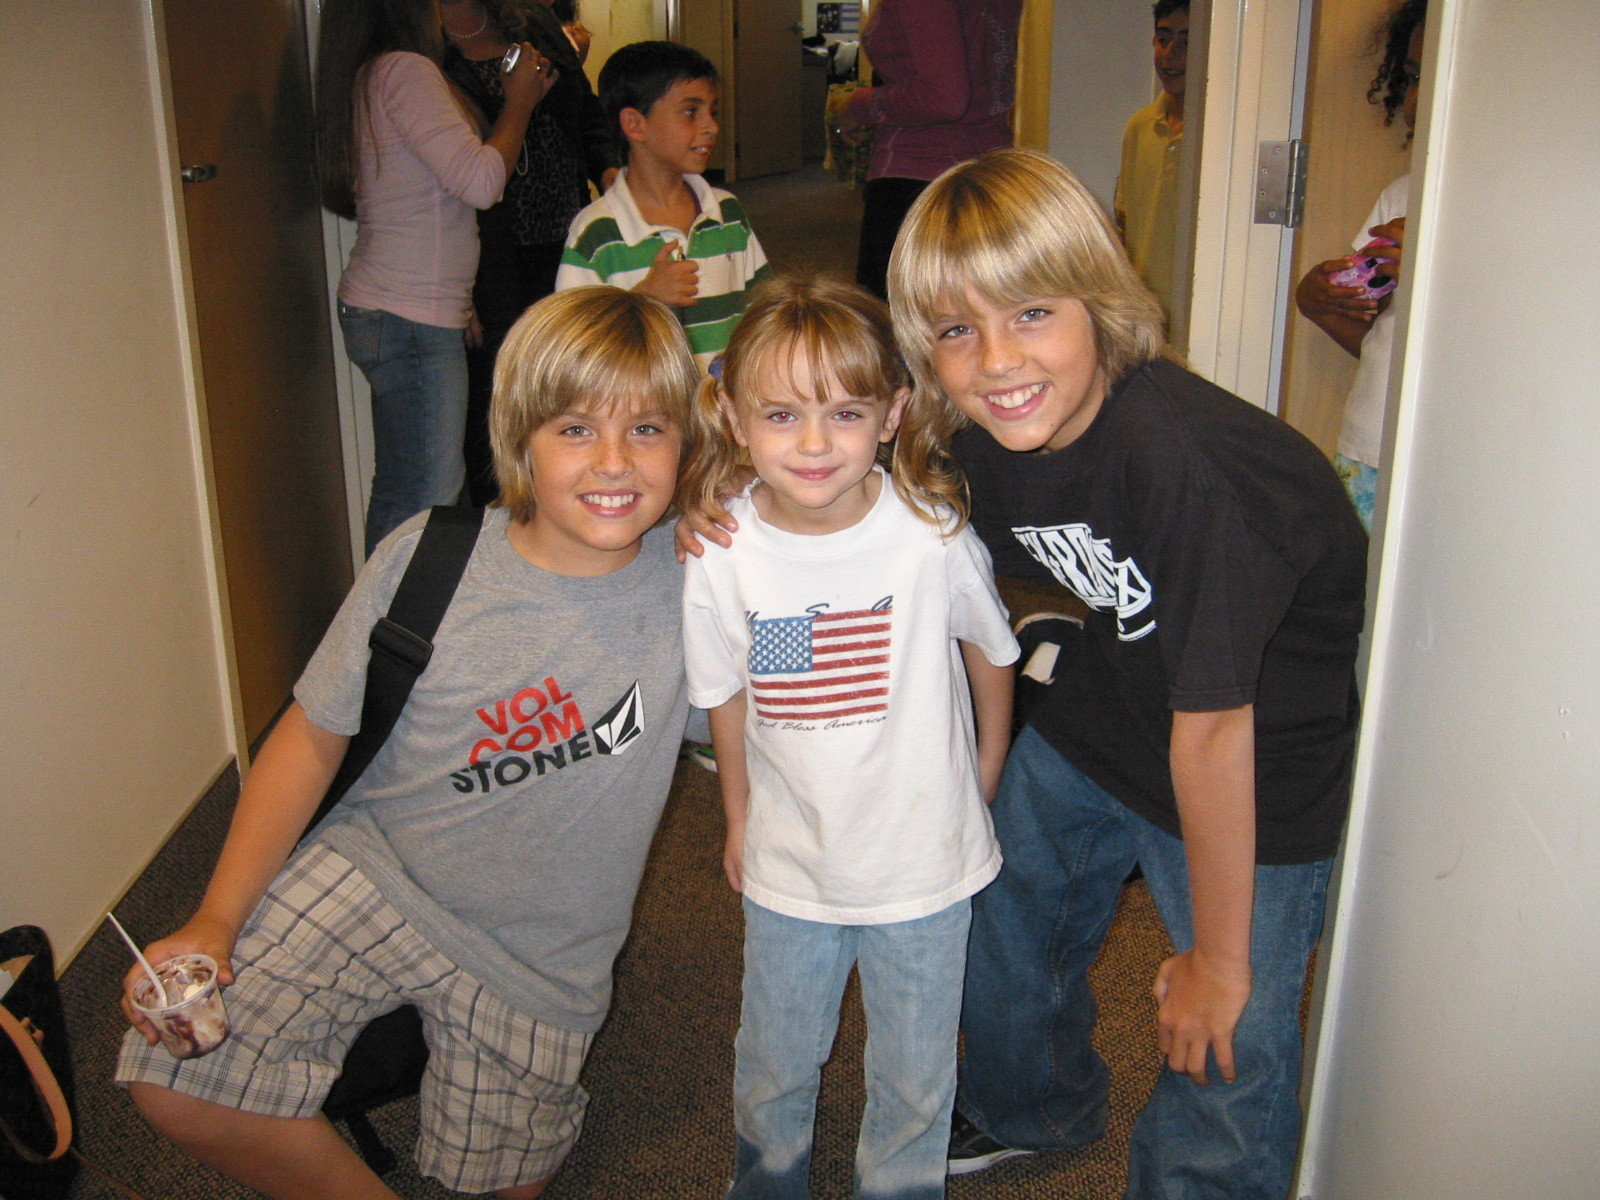 THE SUITE LIFE- Dylan and Cole Sprouse and Joey King